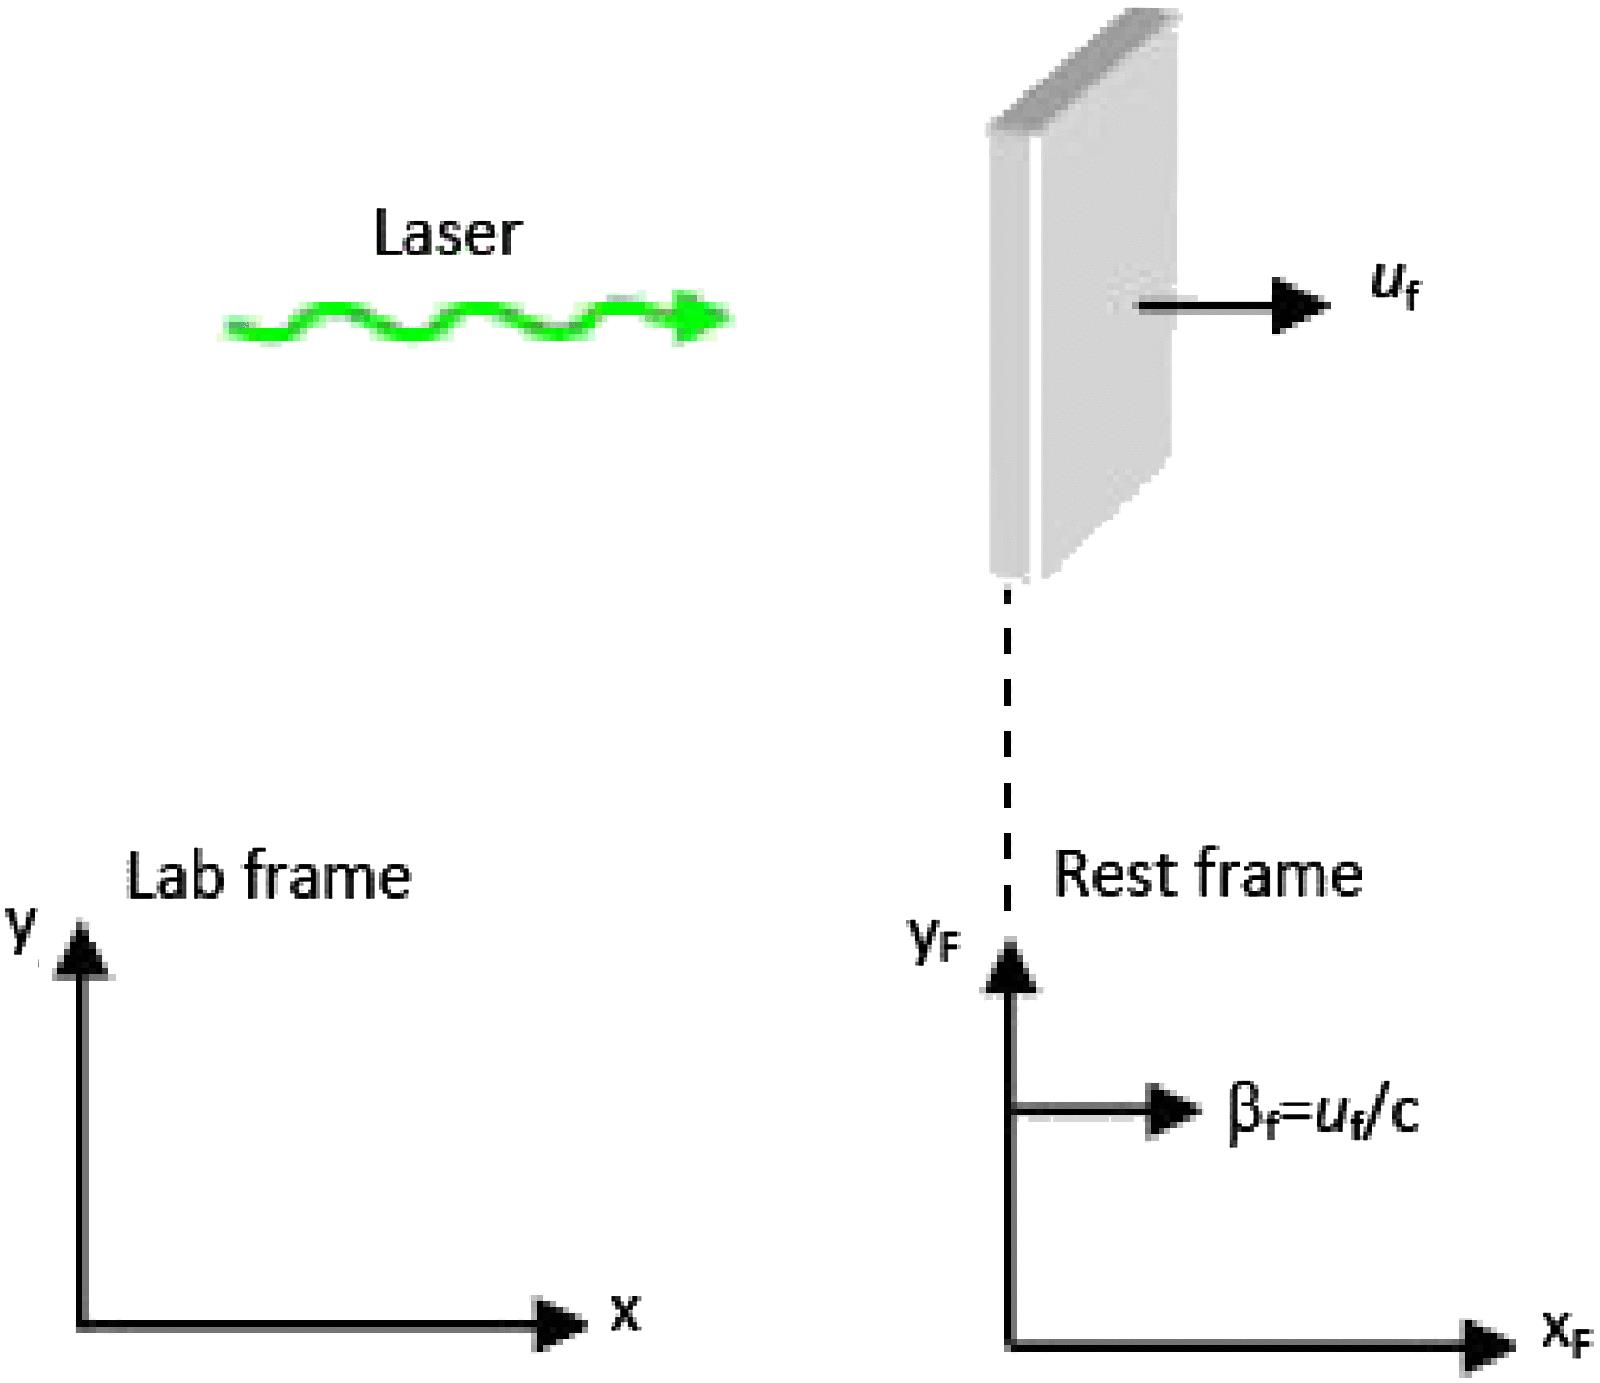 Laser acceleration of a micro-foil in the laboratory and the rest frame of references.